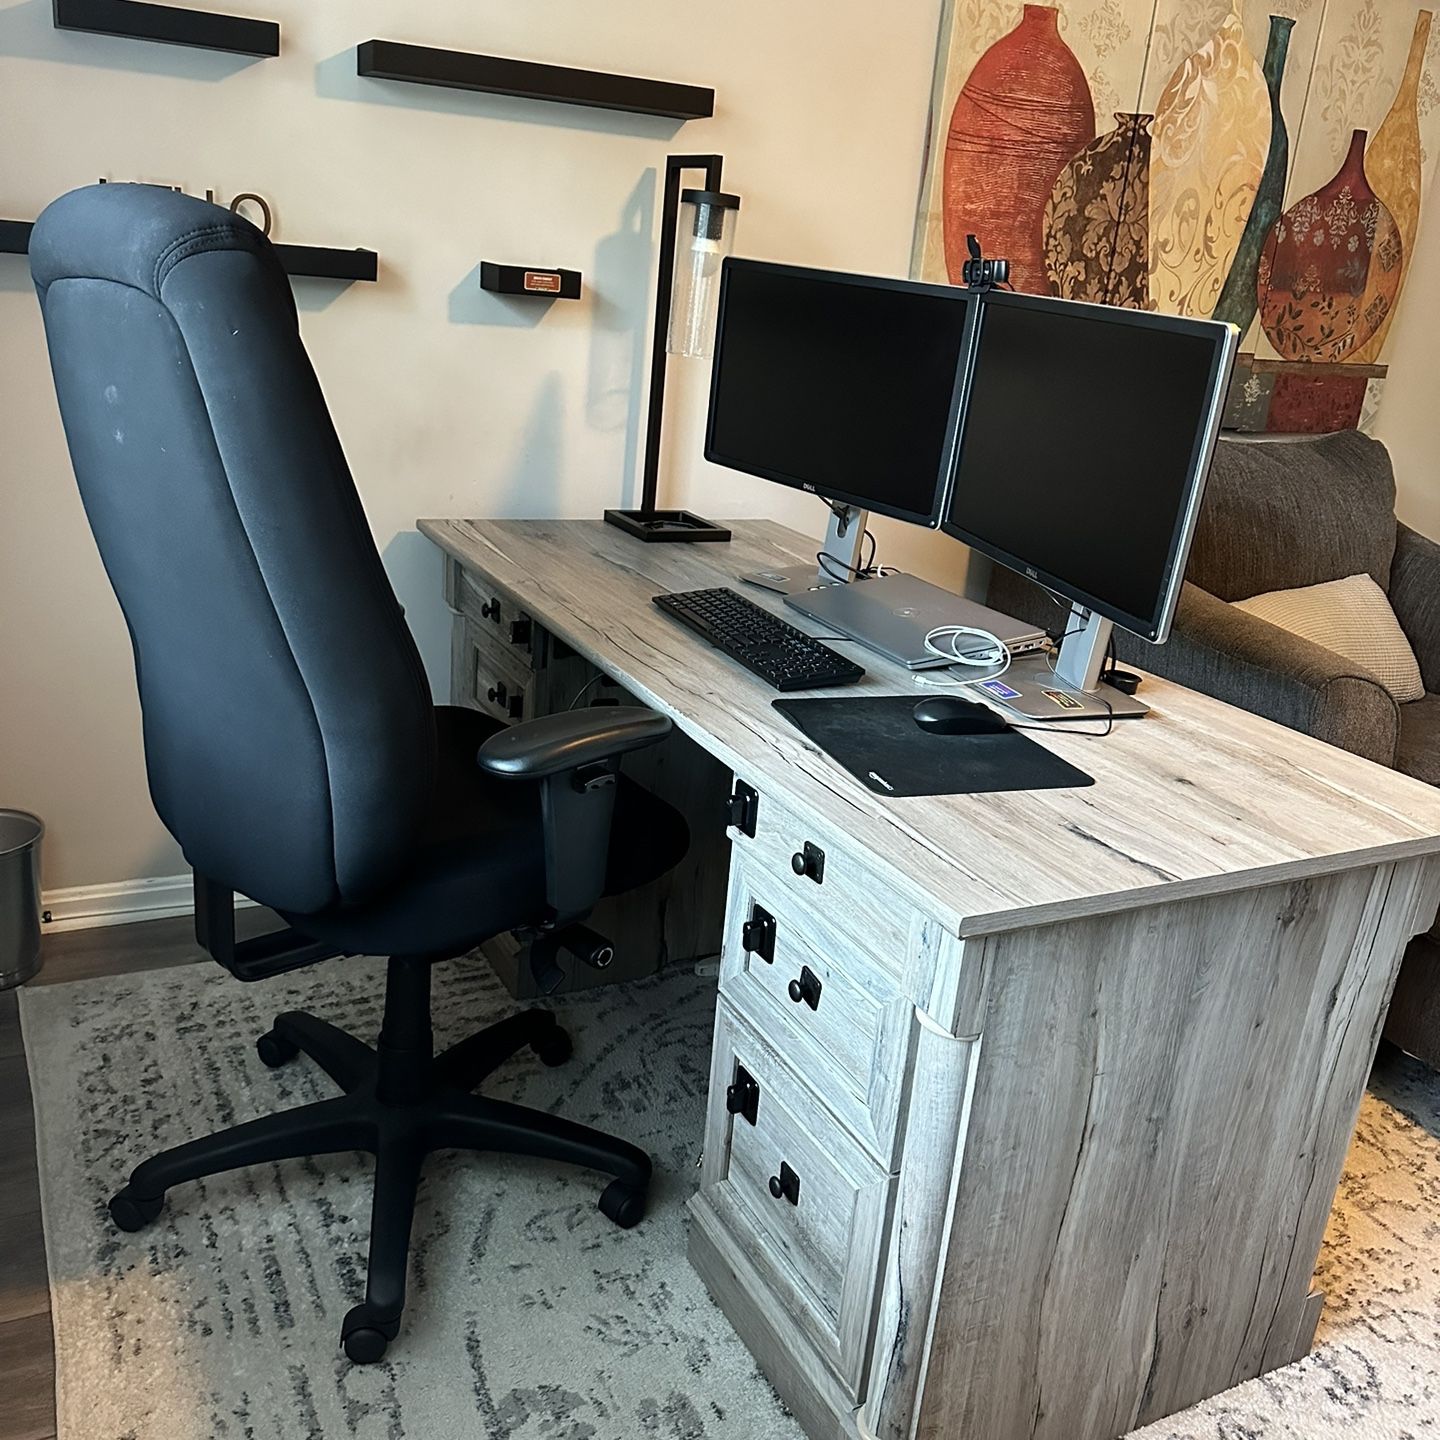 Home Office Desk & Chair